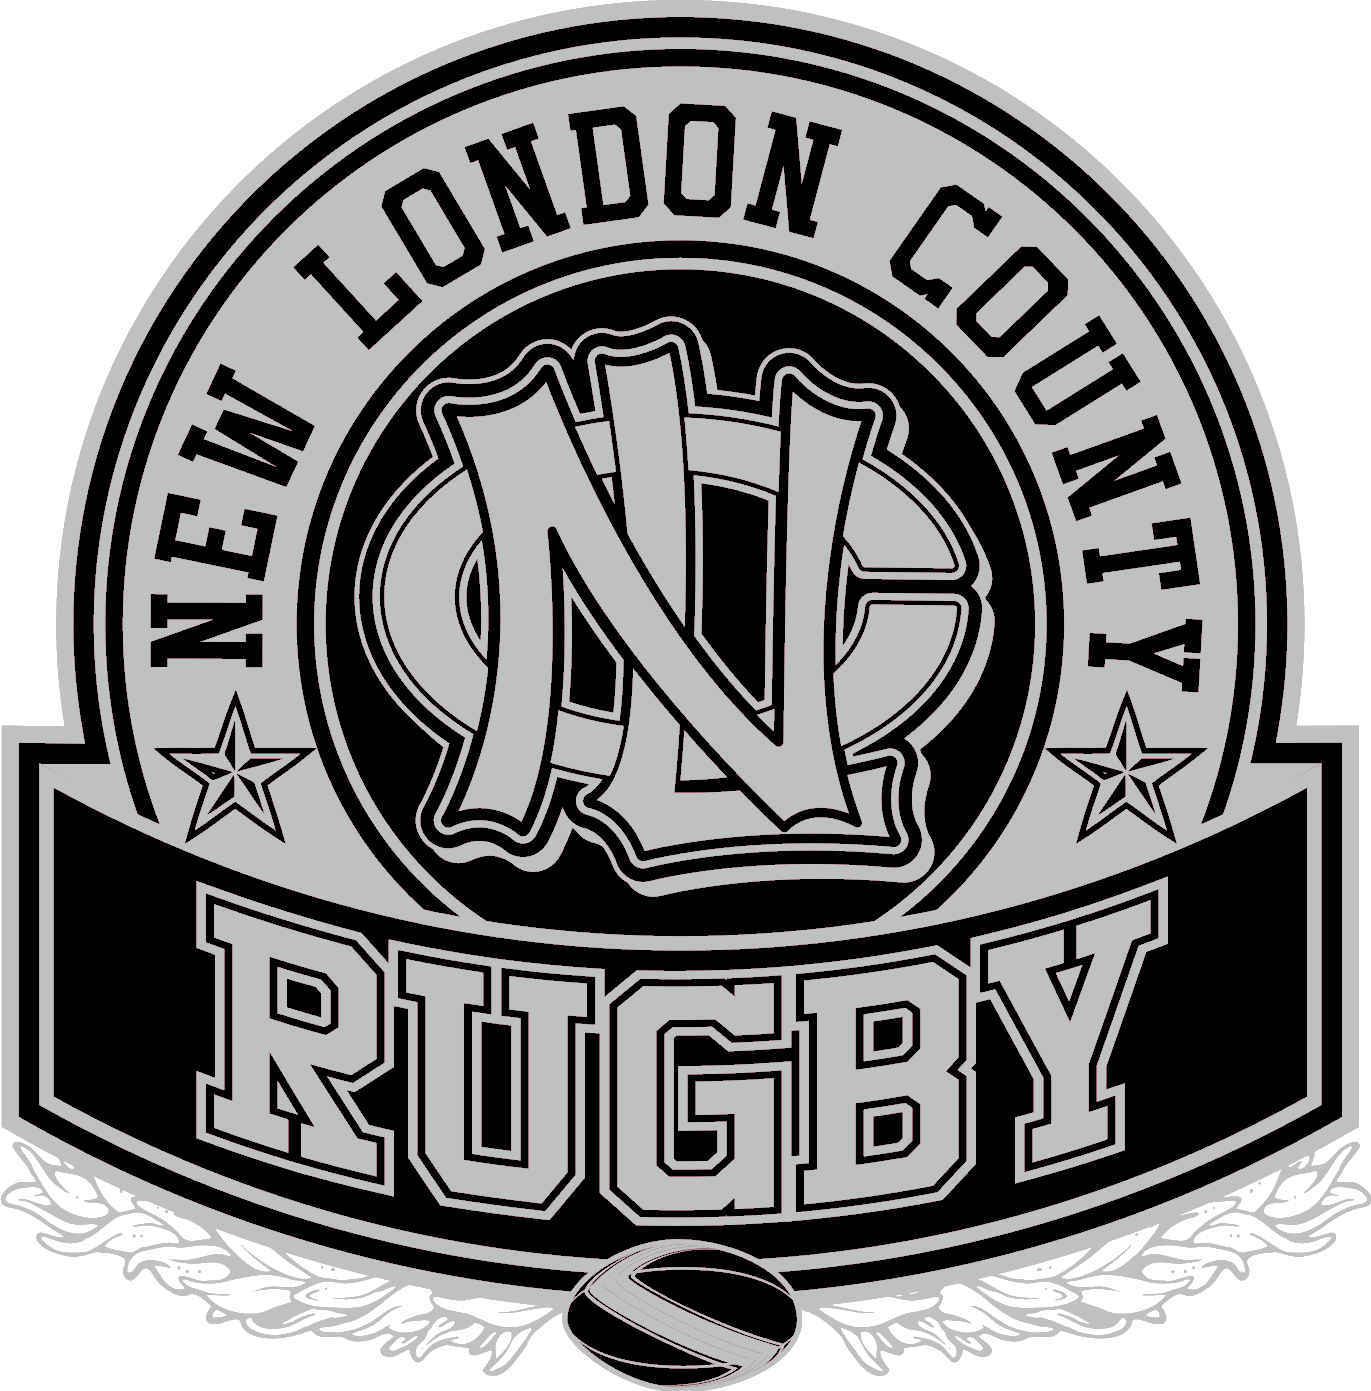 New London Rugby